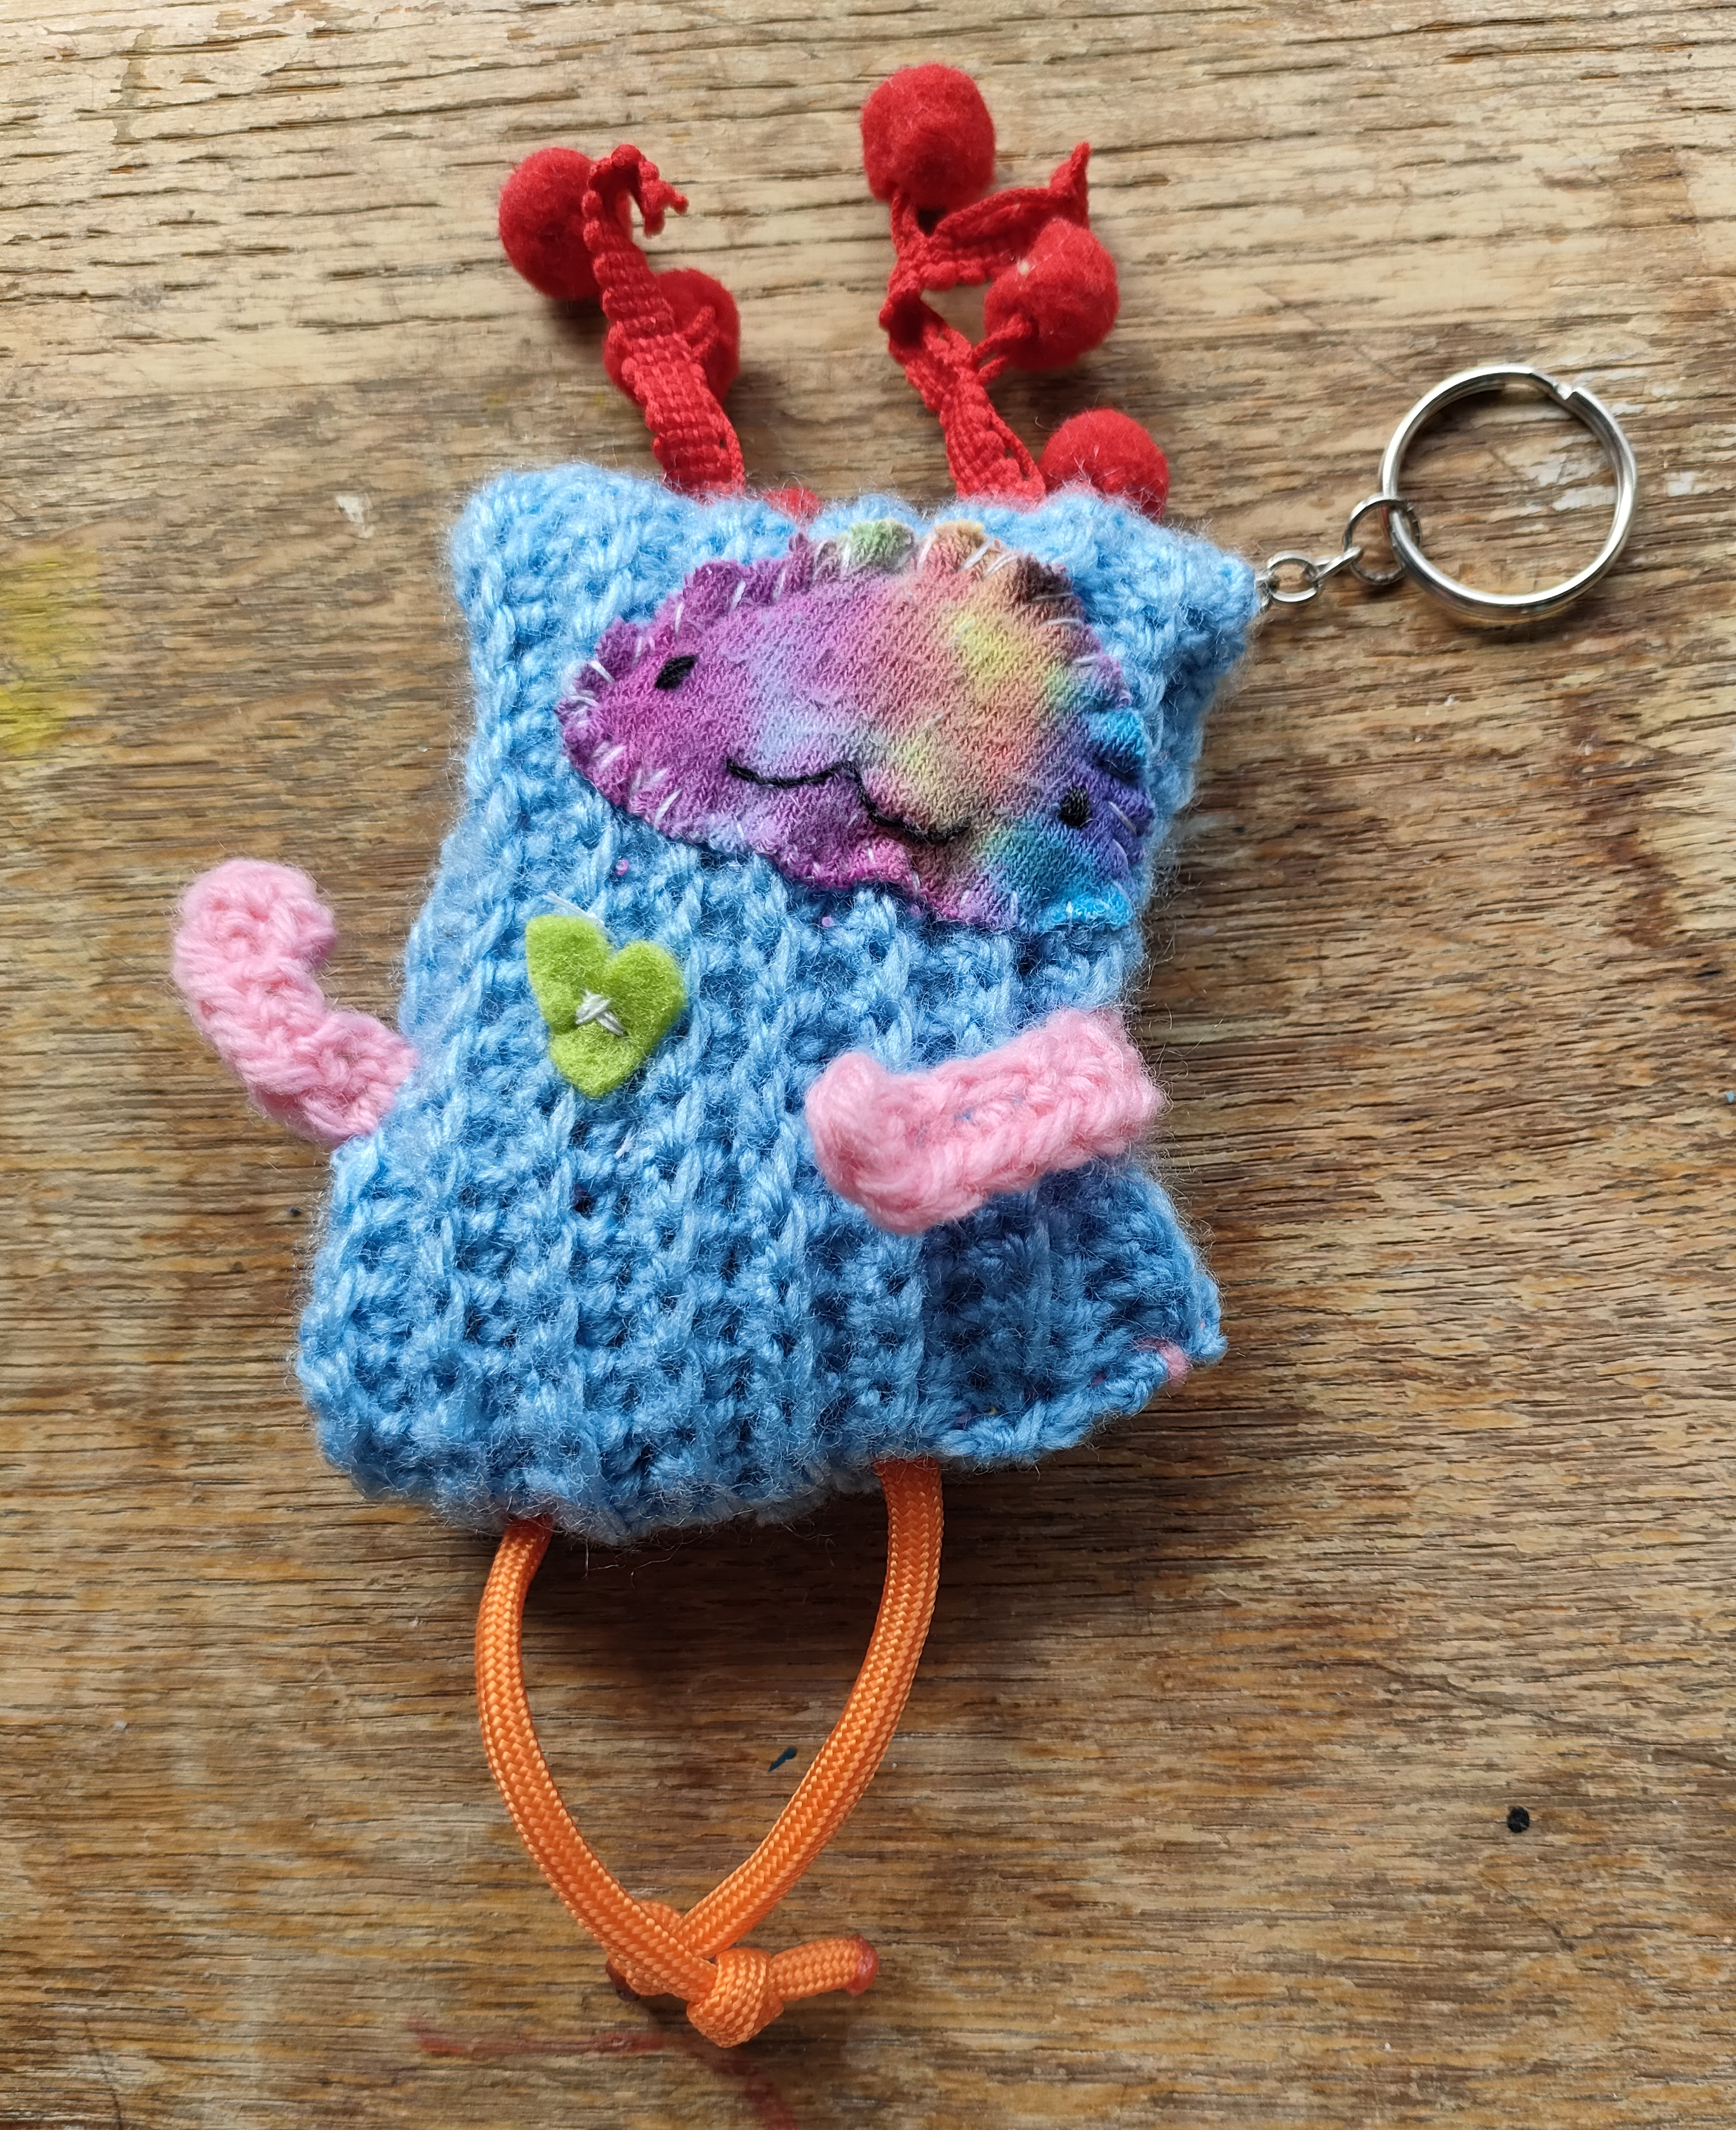 Handmade keyring of a crocheted blue creature with a friendly expression and multicoloured limbs, as well as a red felt heart.